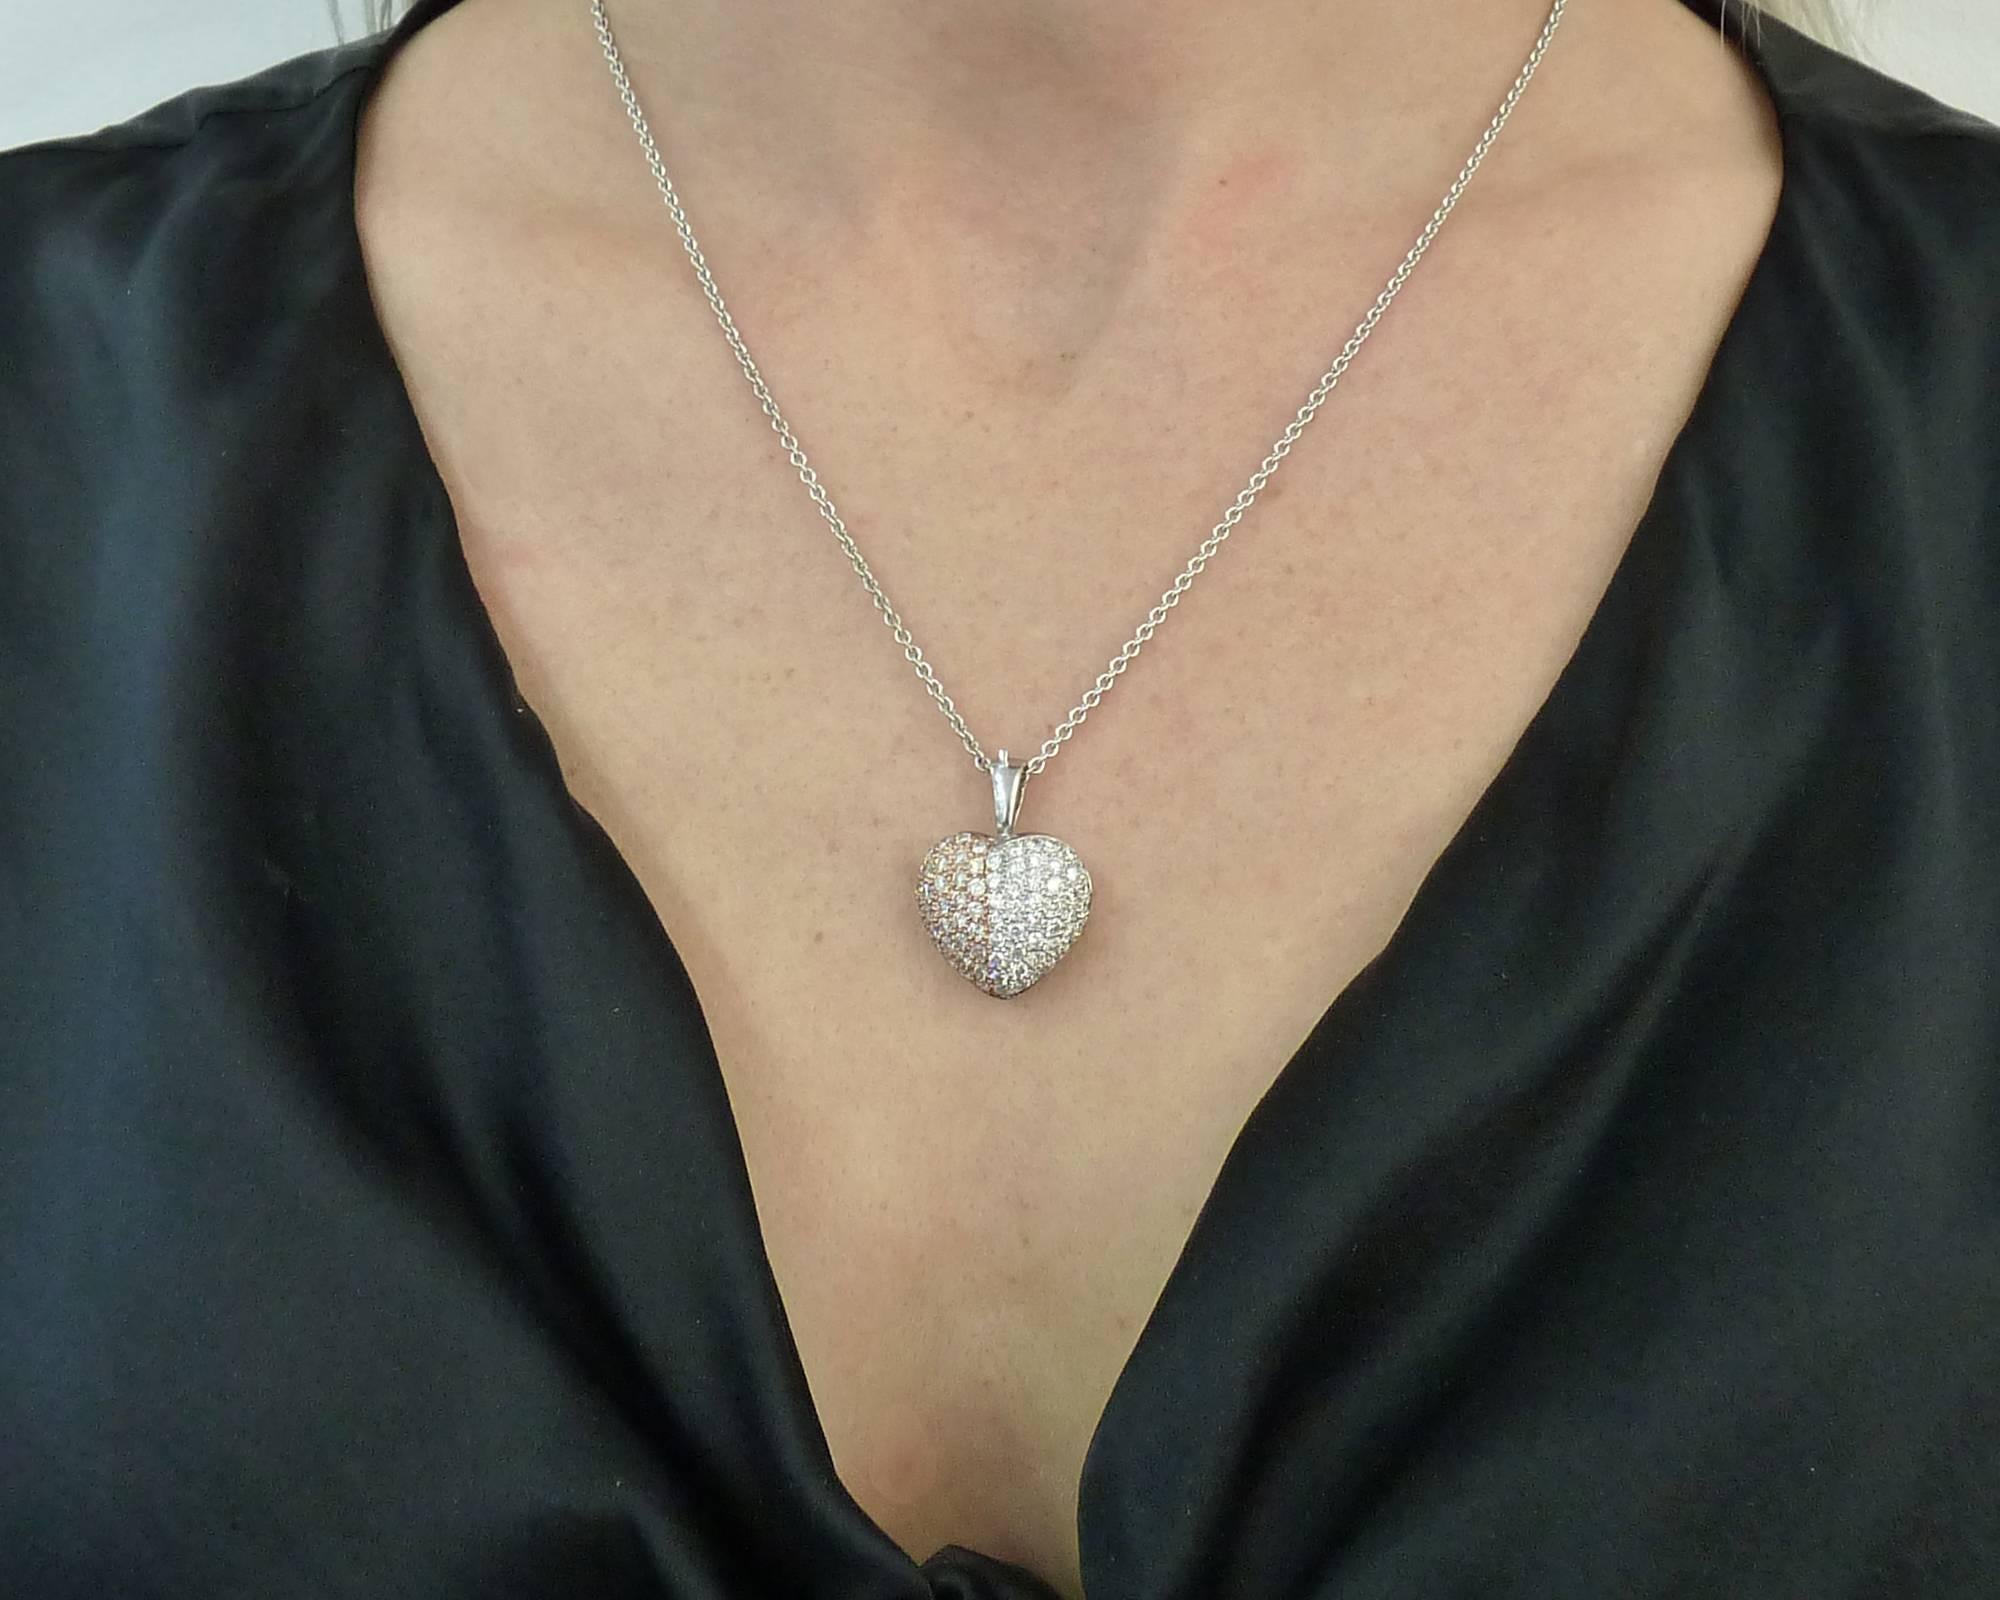 Introducing a stunning Contemporary Heart-Shaped Diamond Pendant Necklace that exudes elegance and charm. This exquisite piece features diamonds totaling approximately 3.30 carats, adding a brilliant and captivating sparkle. Crafted with precision,